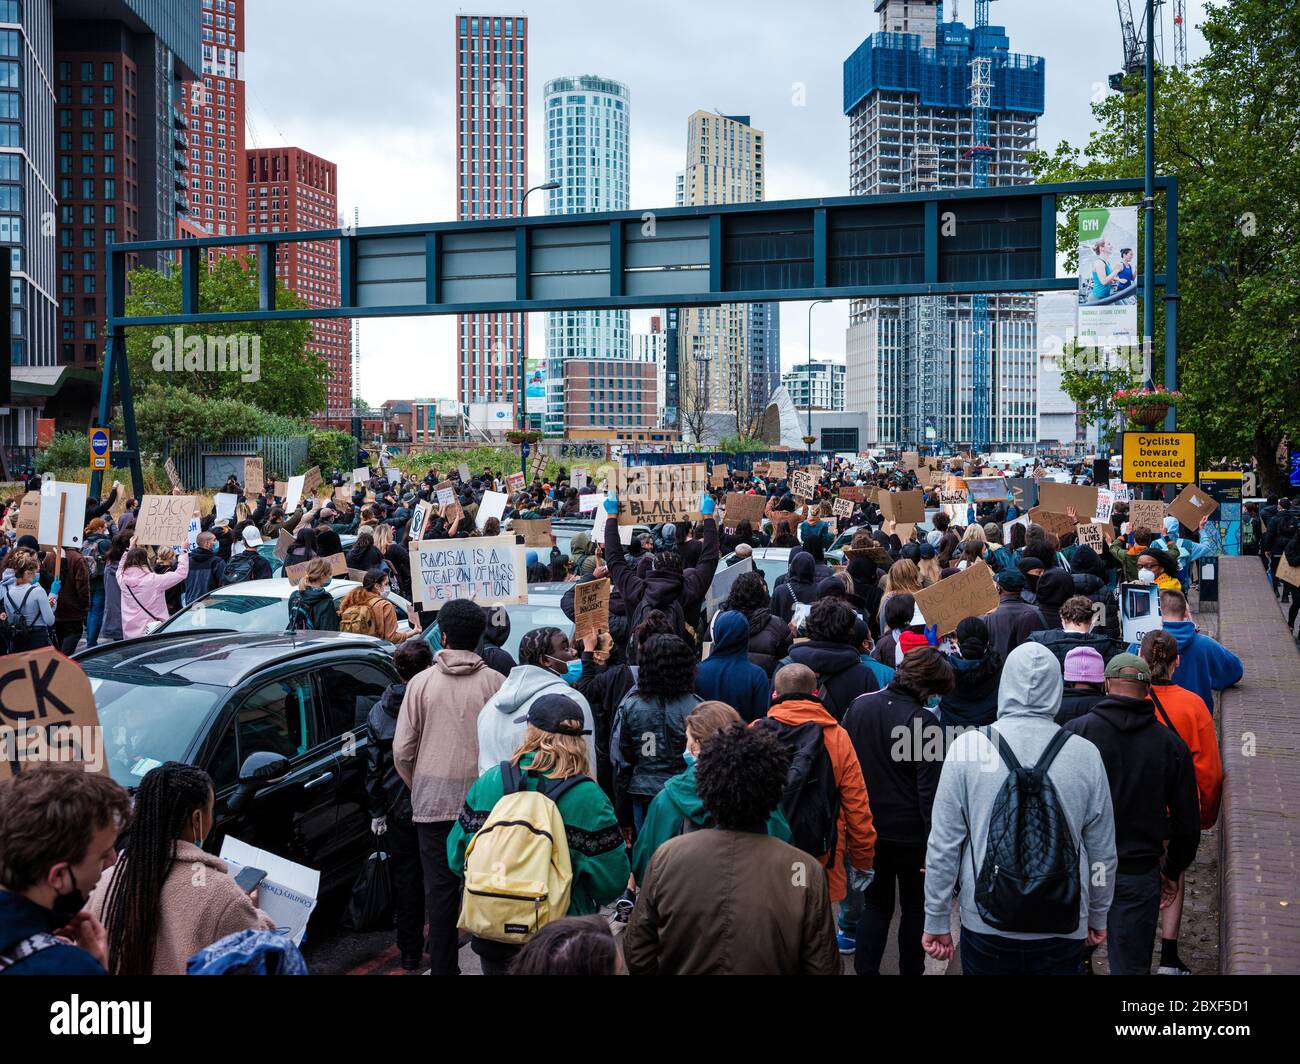 London, UK. 6th June, 2020. Black Lives Matter Protest passing Vauxhall Station in London.  In memory of George Floyd who was killed on the 25th May while in police custody in the US city of Minneapolis. Credit: Yousef Al Nasser/Alamy Live News. Stock Photo